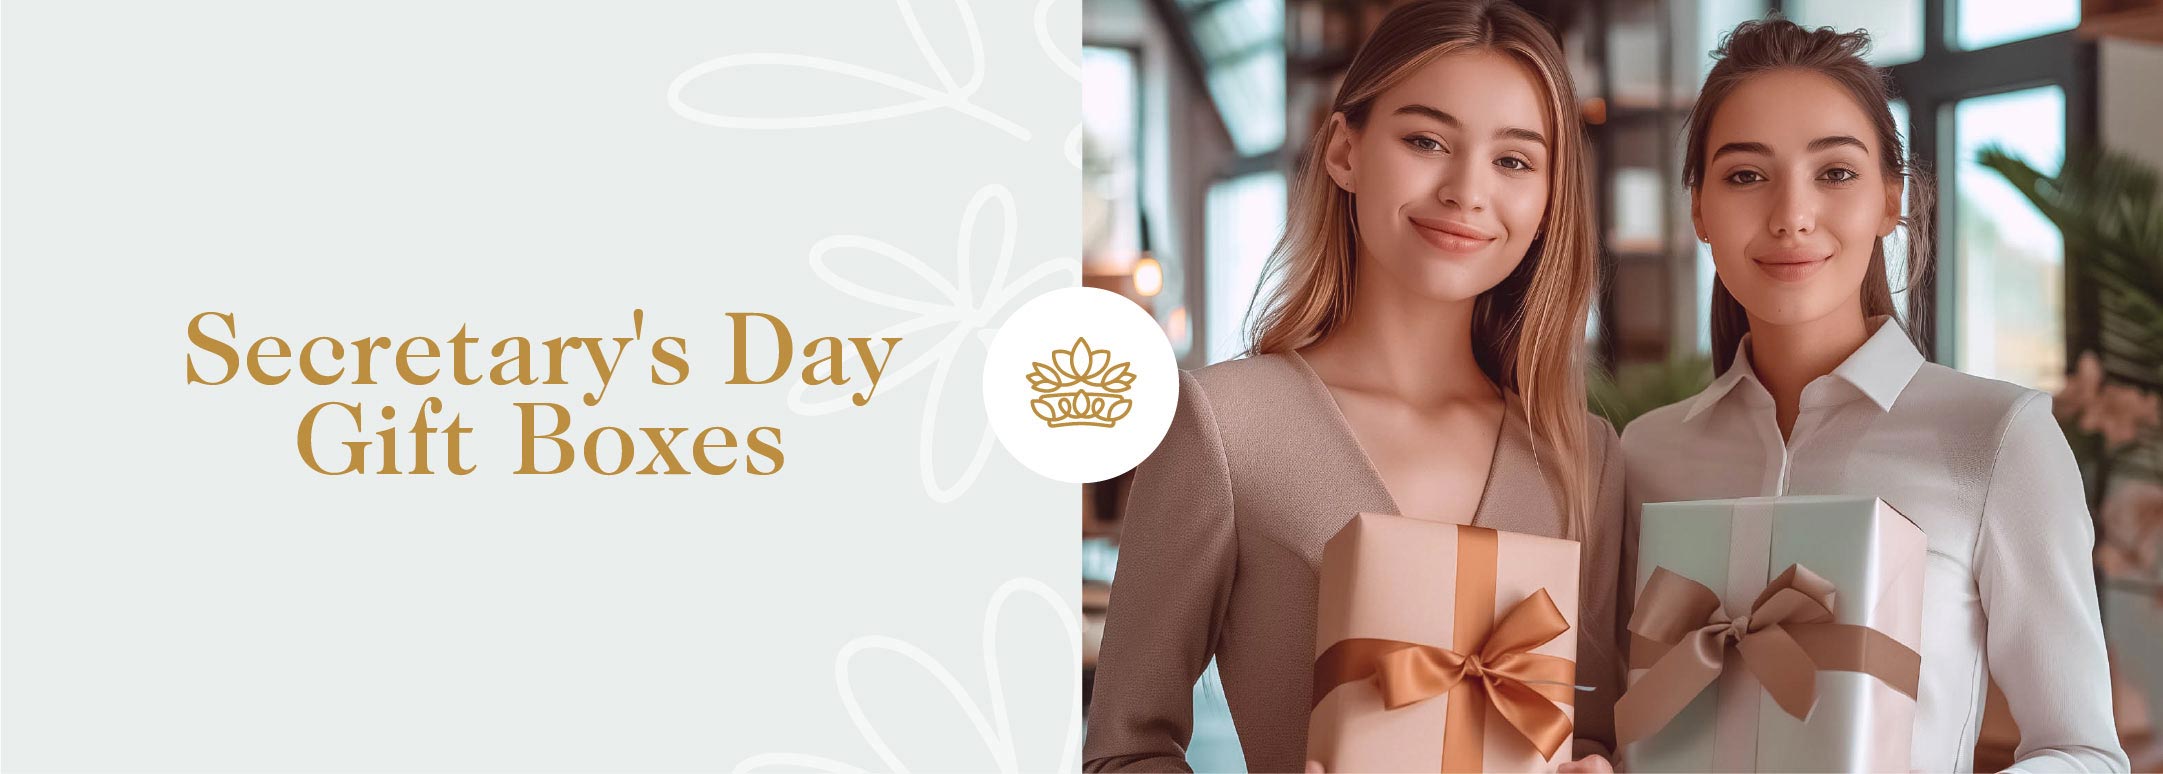 Two professional women smiling while holding elegant gift boxes, celebrating Secretary's Day in an office environment. Secretary's Day Gift Boxes Collection by Fabulous Flowers and Gifts.